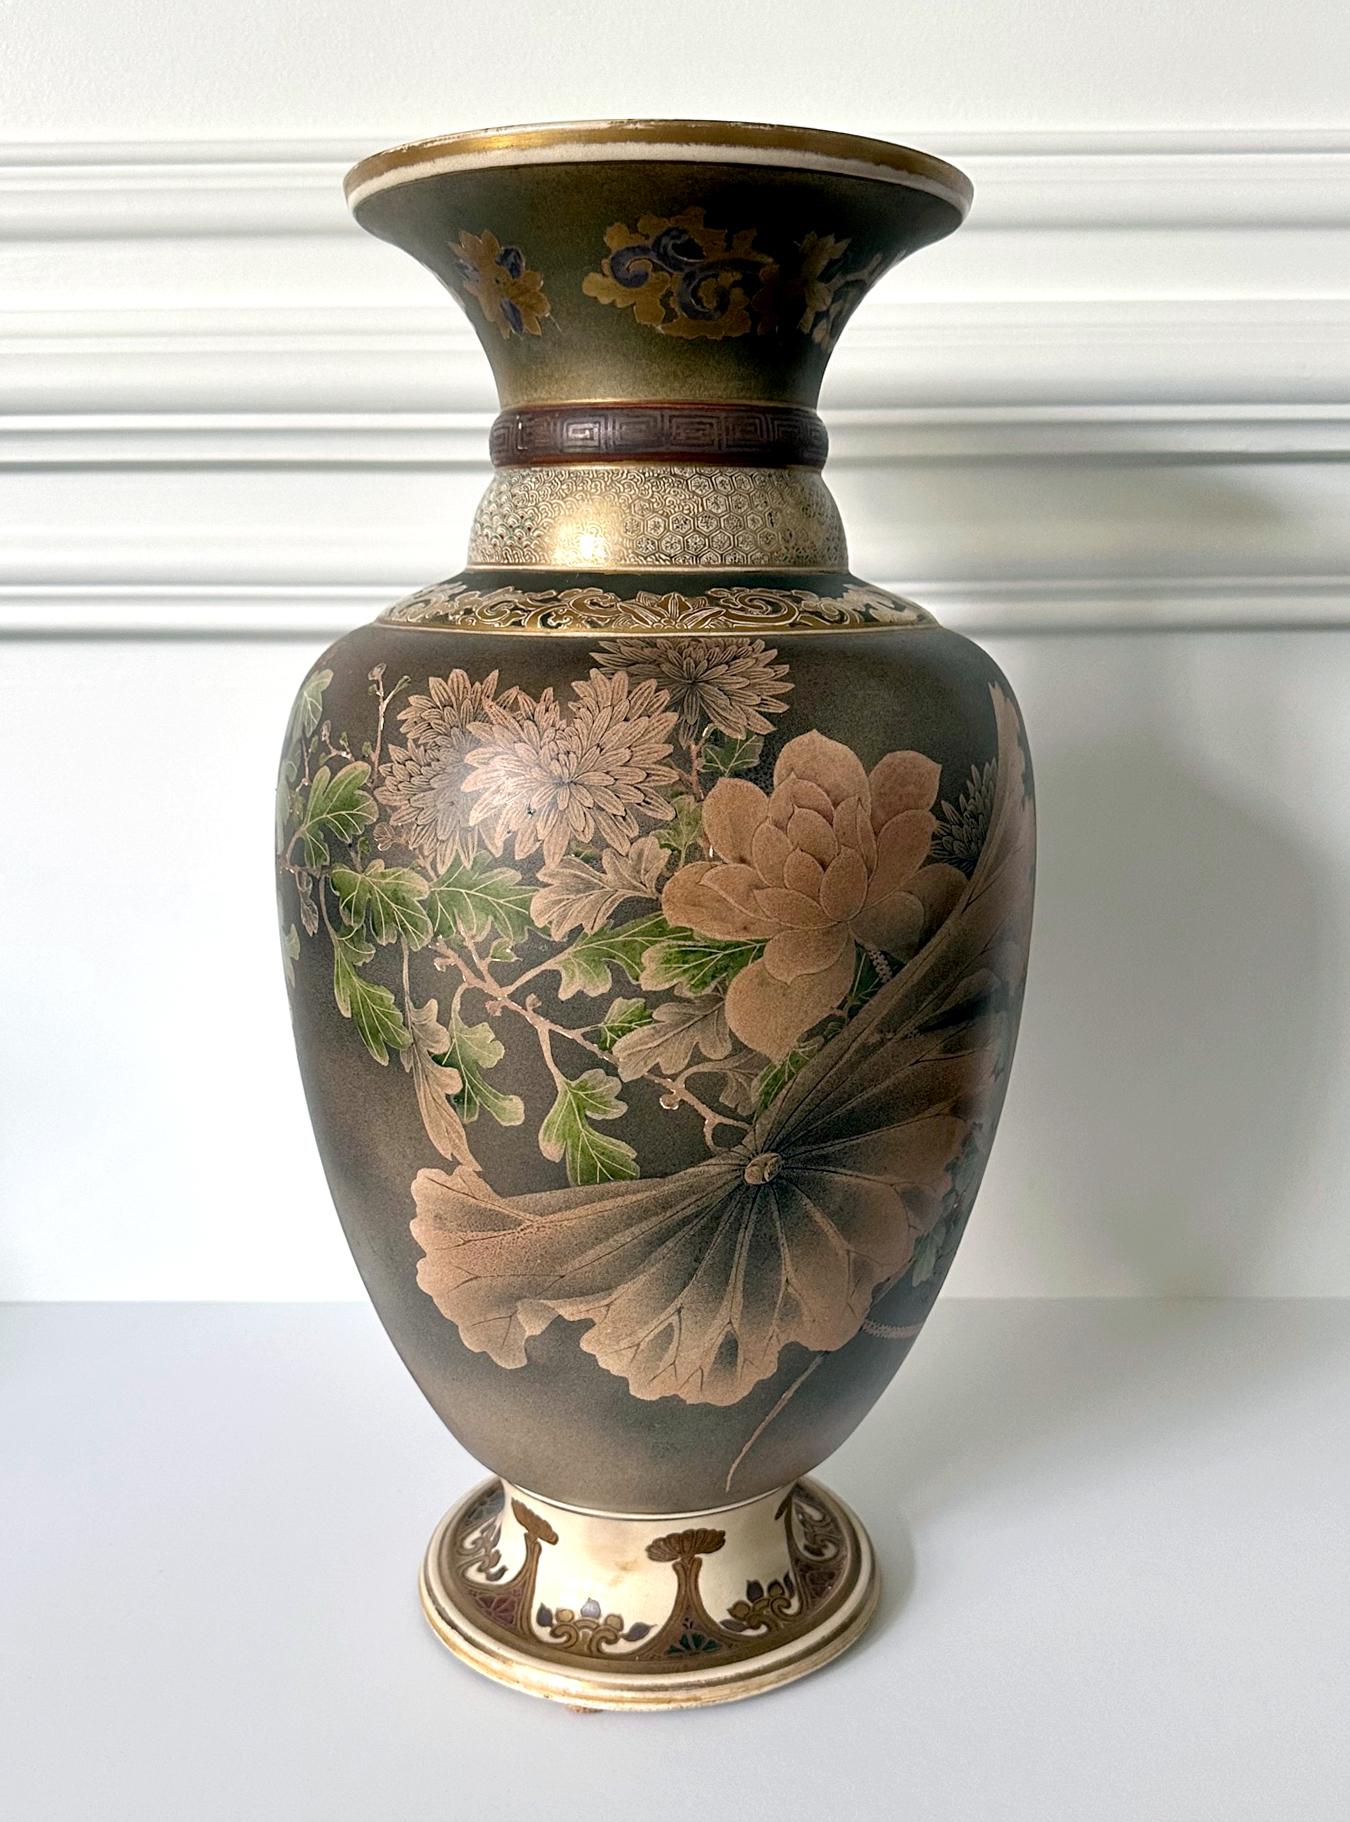 A large Japanese ceramic vase from the end of Meiji period circa 1890-1910s by Kinkozan (1645-1927). One of the largest studio manufacturers of the export ceramics at the time based in Kyoto. In the typical style of satsuma made at the turn of 20th